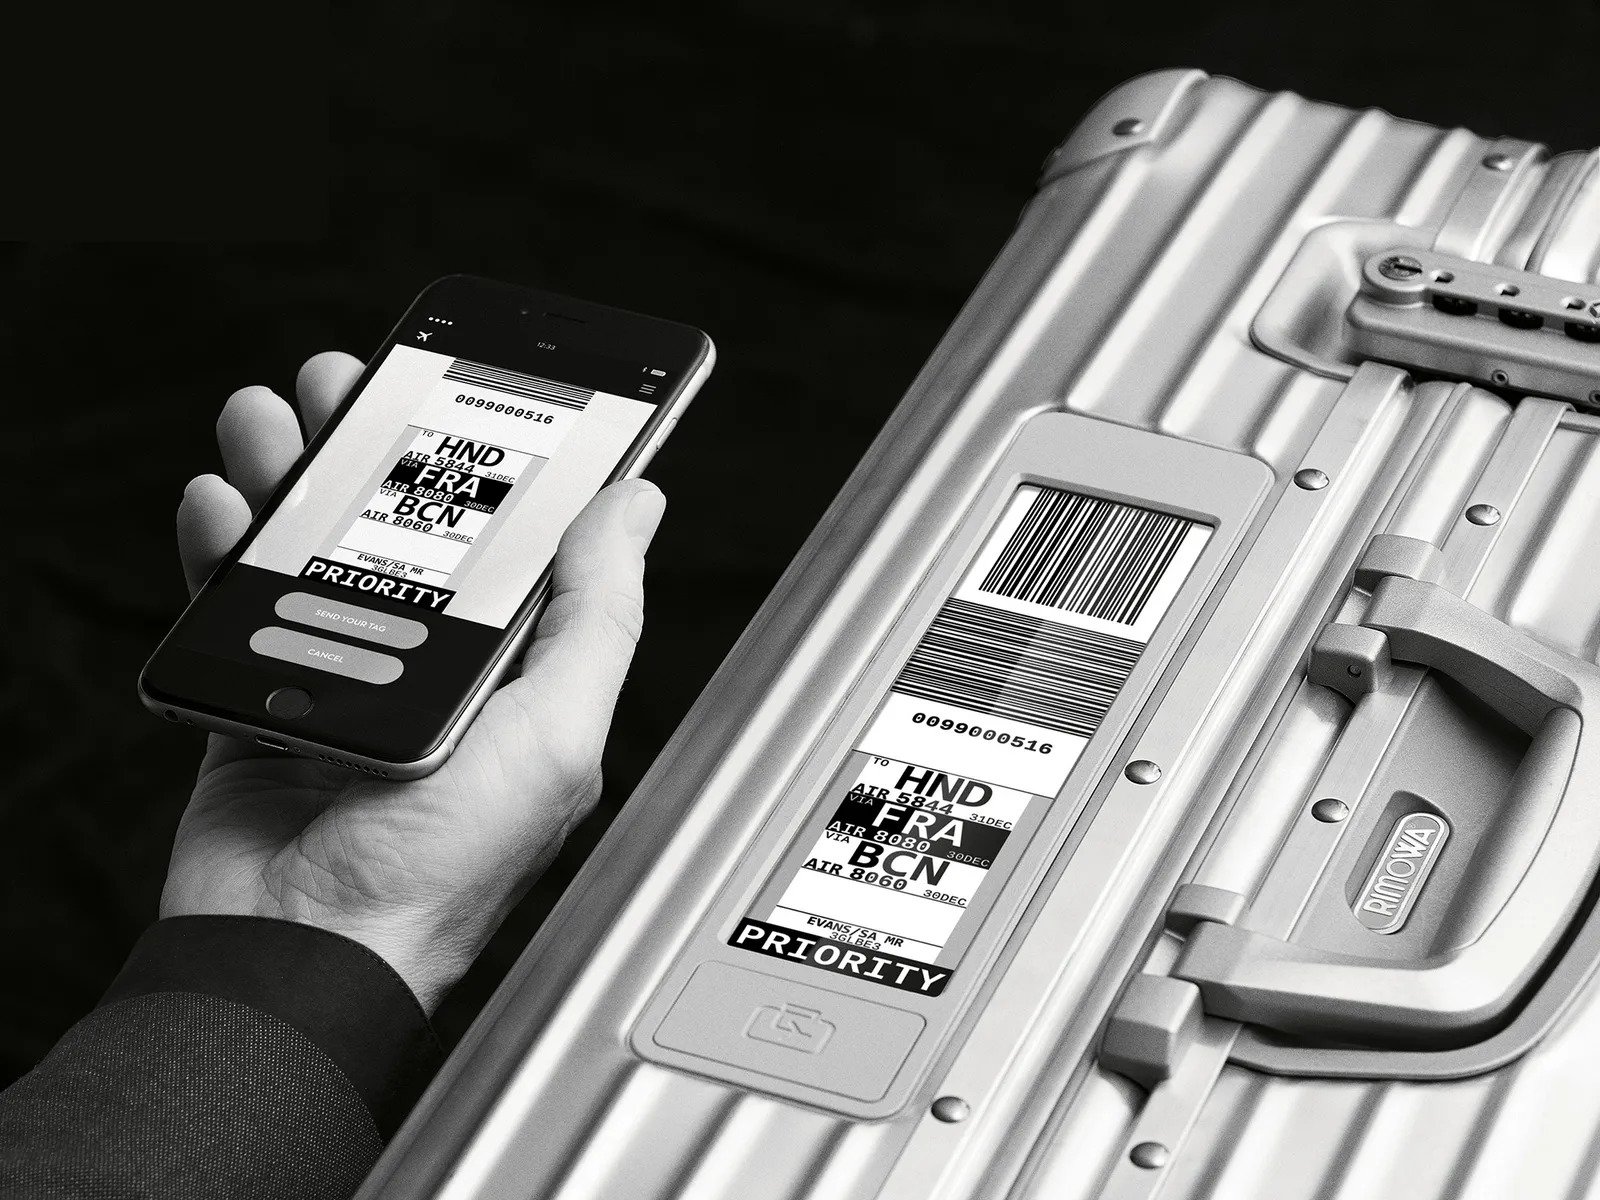 You Can Use Your Phone to Check This Smart Luggage In | WIRED